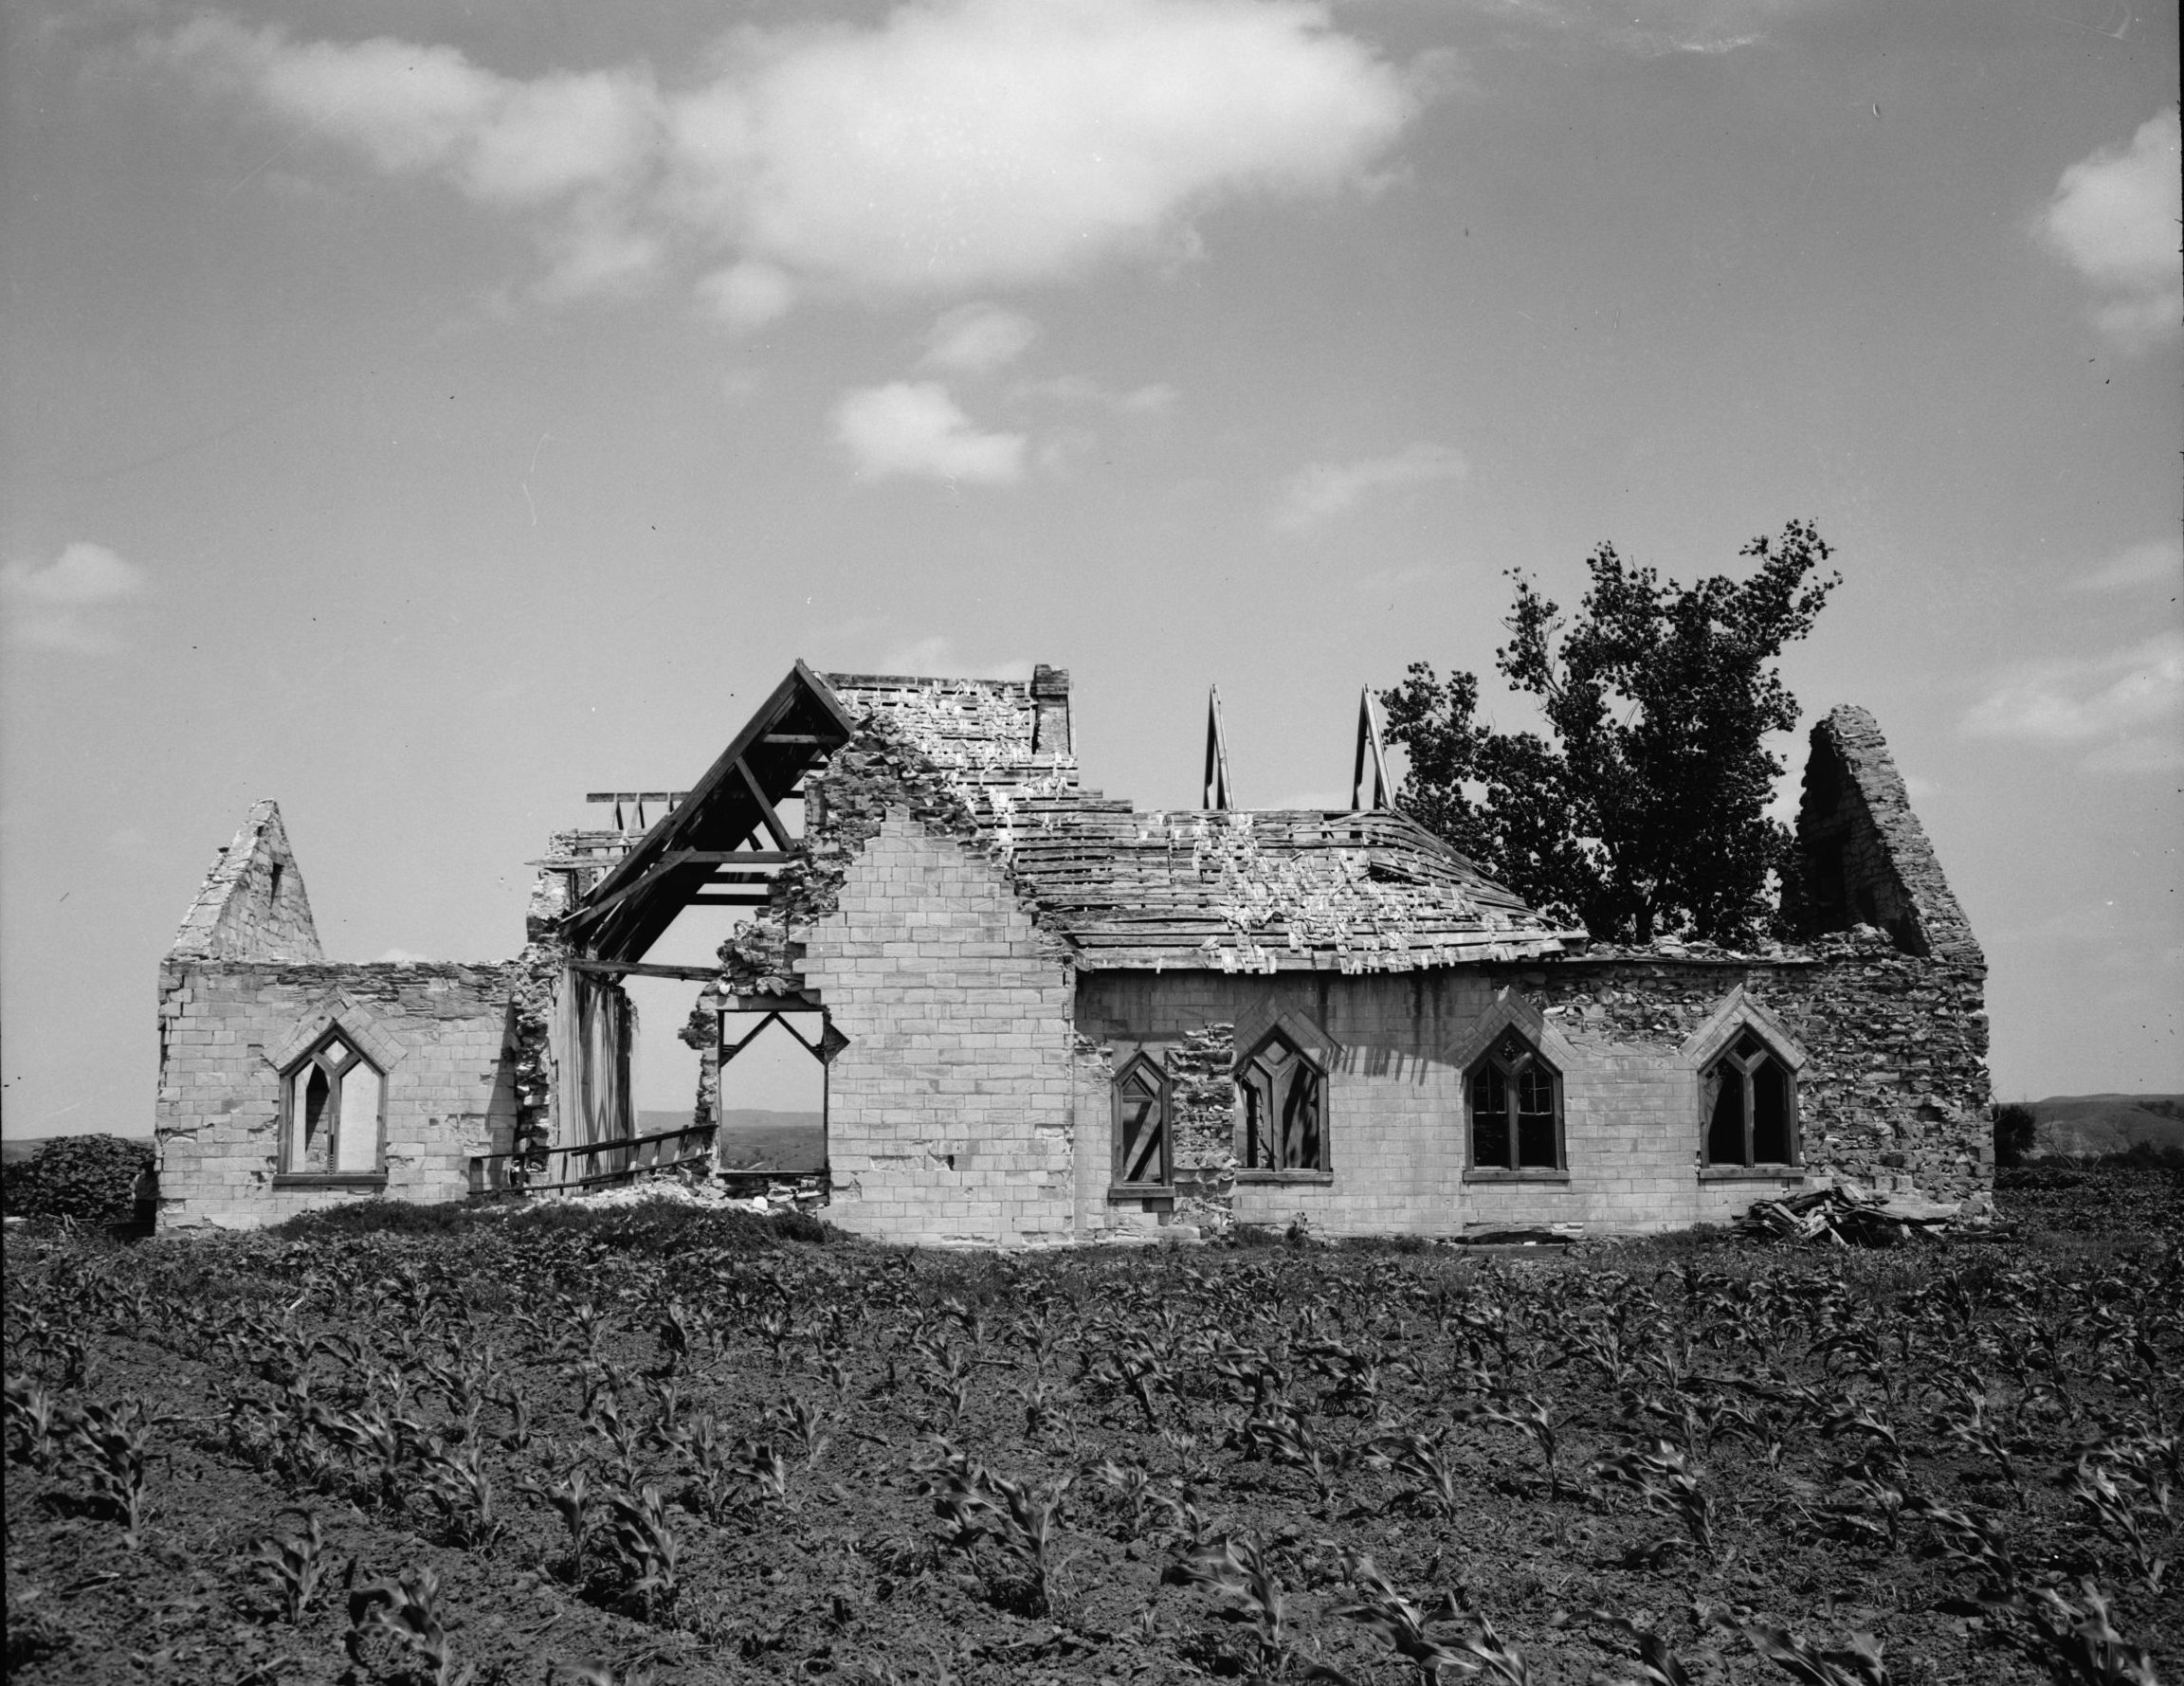 Ruins of Old Fort Randall Church on the right bank of the Missouri River in Pickstown, Charles Mix County, South Dakota, on July 9, 1947. By Roy Oglesby for Historic American Buildings Survey, via Wikimedia Commons.